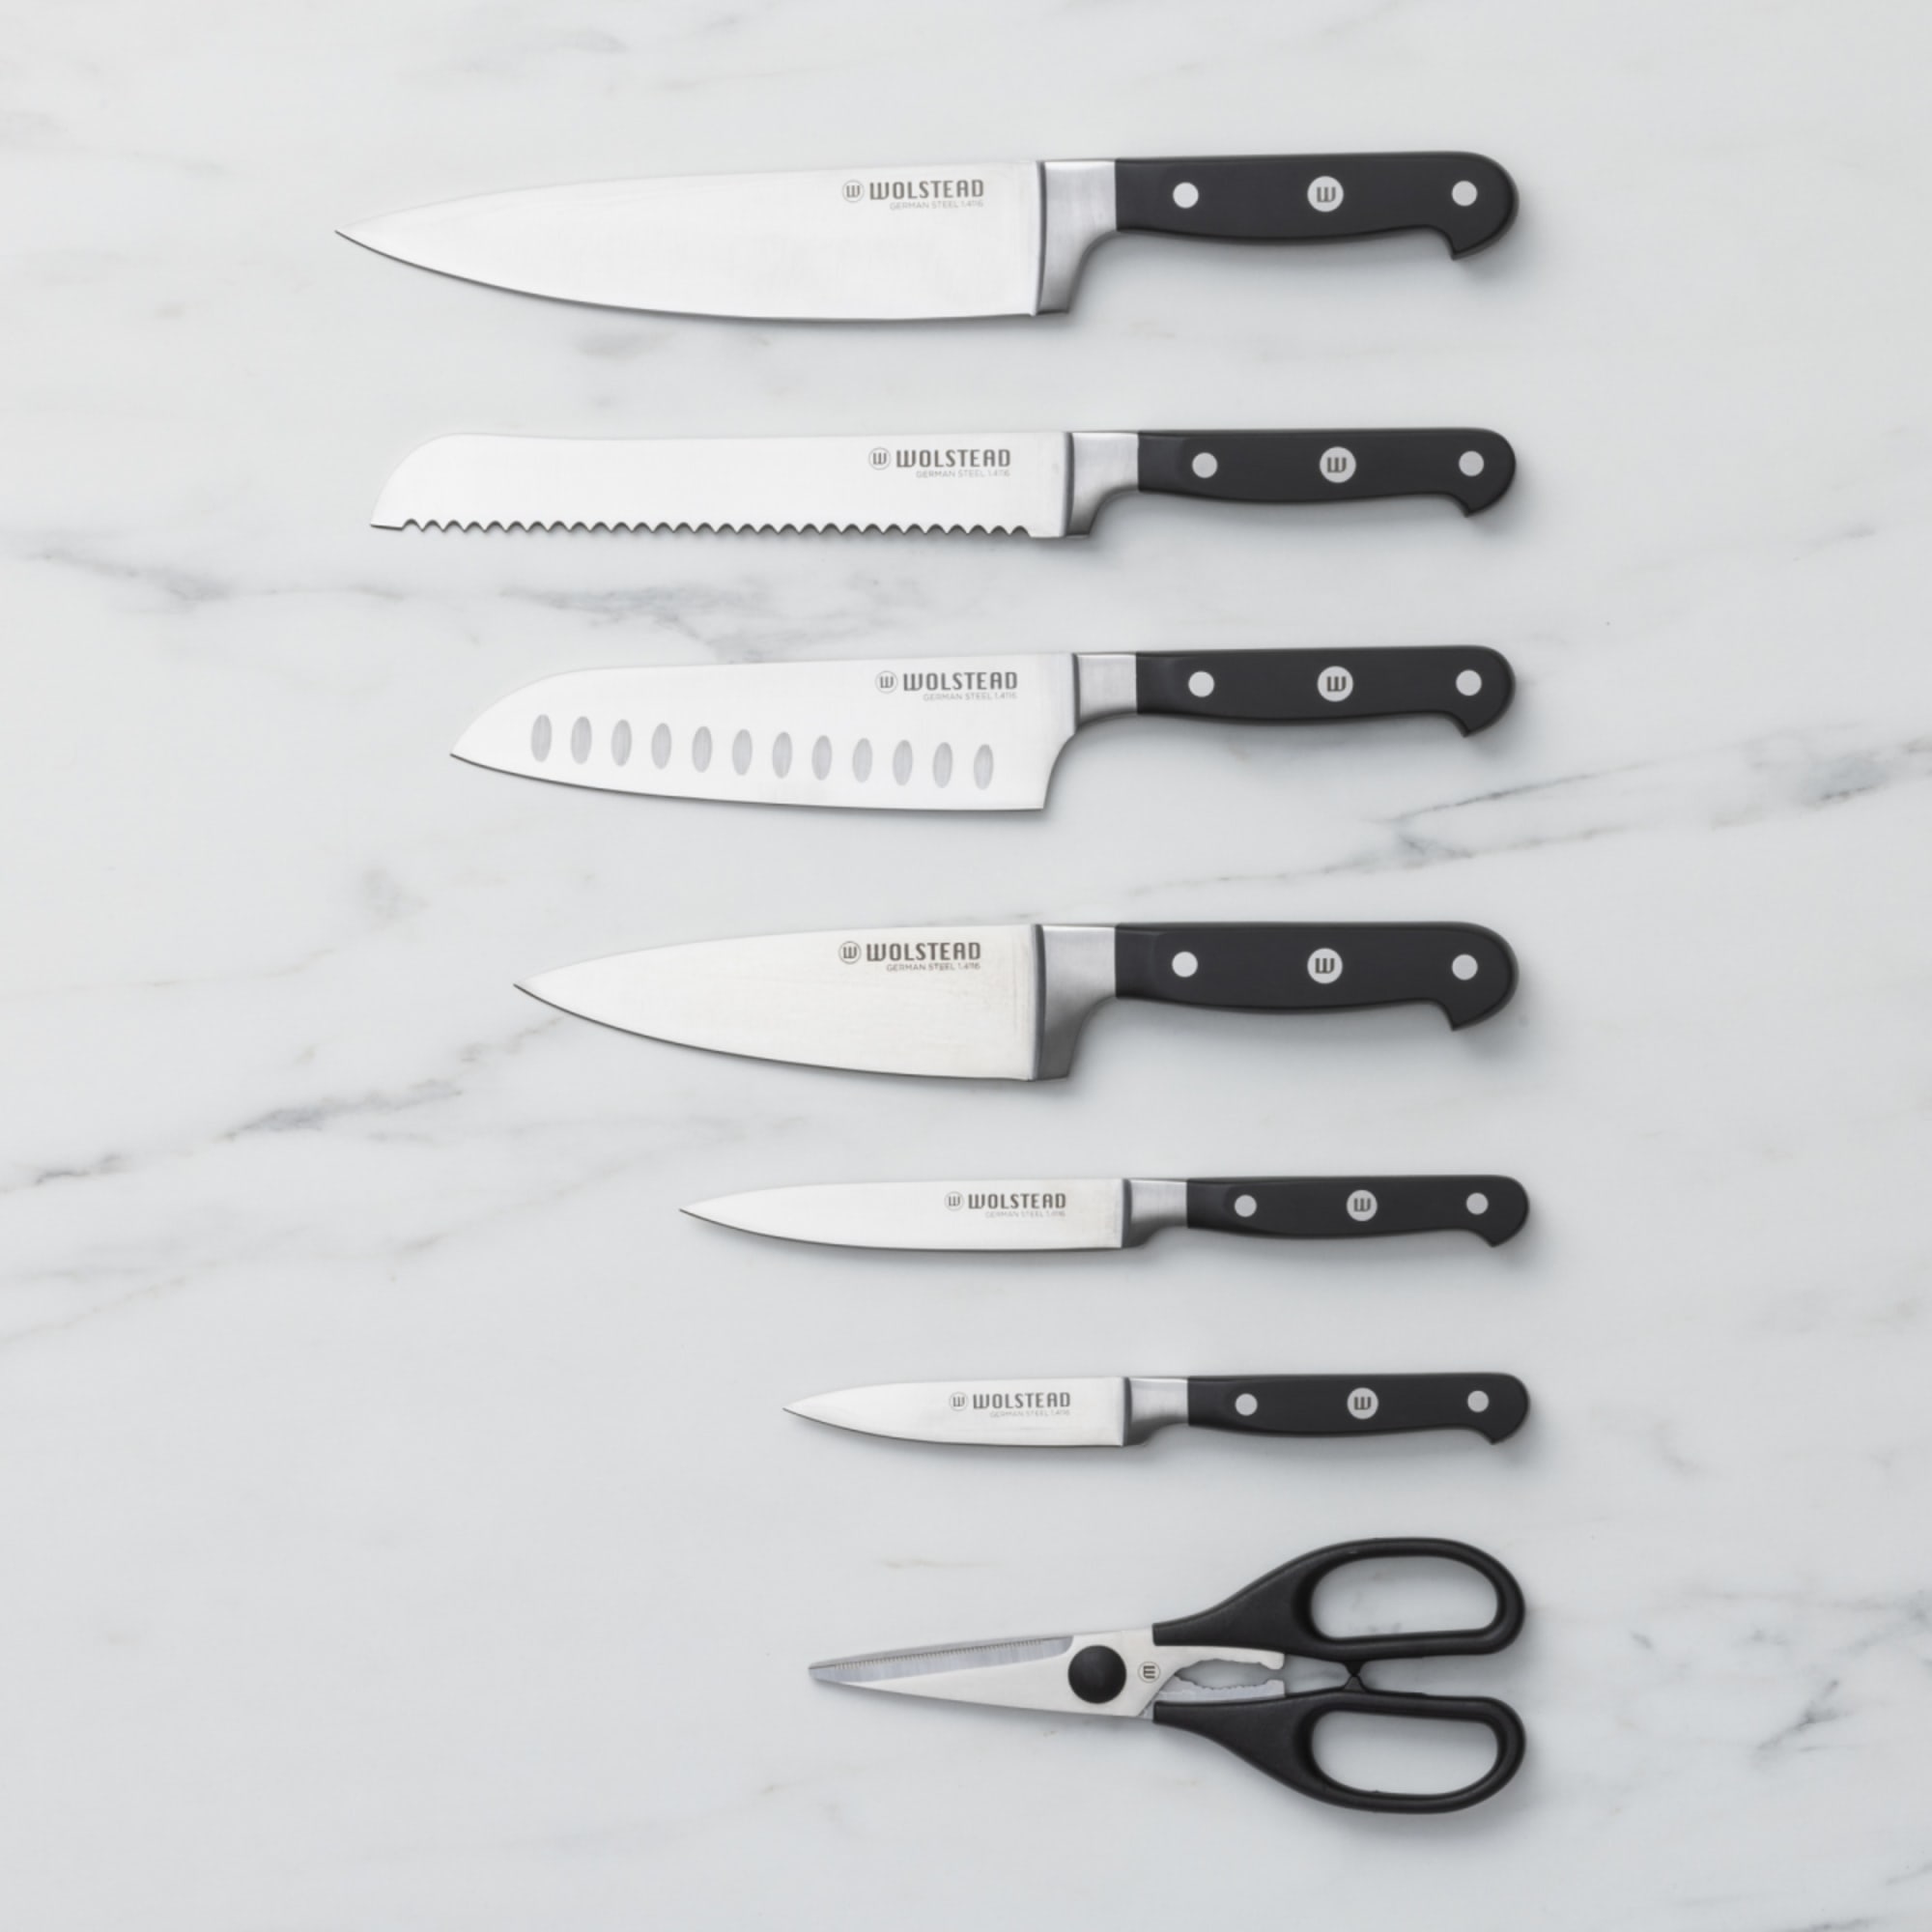 https://res.cloudinary.com/kitchenwarehouse/image/upload/c_fill,g_face,w_1250/f_auto/t_PDP_2000x2000/Kitchen%20Warehouse%20Images%20/Wolstead-Calibre-8pc-Knife-Block-D.jpg